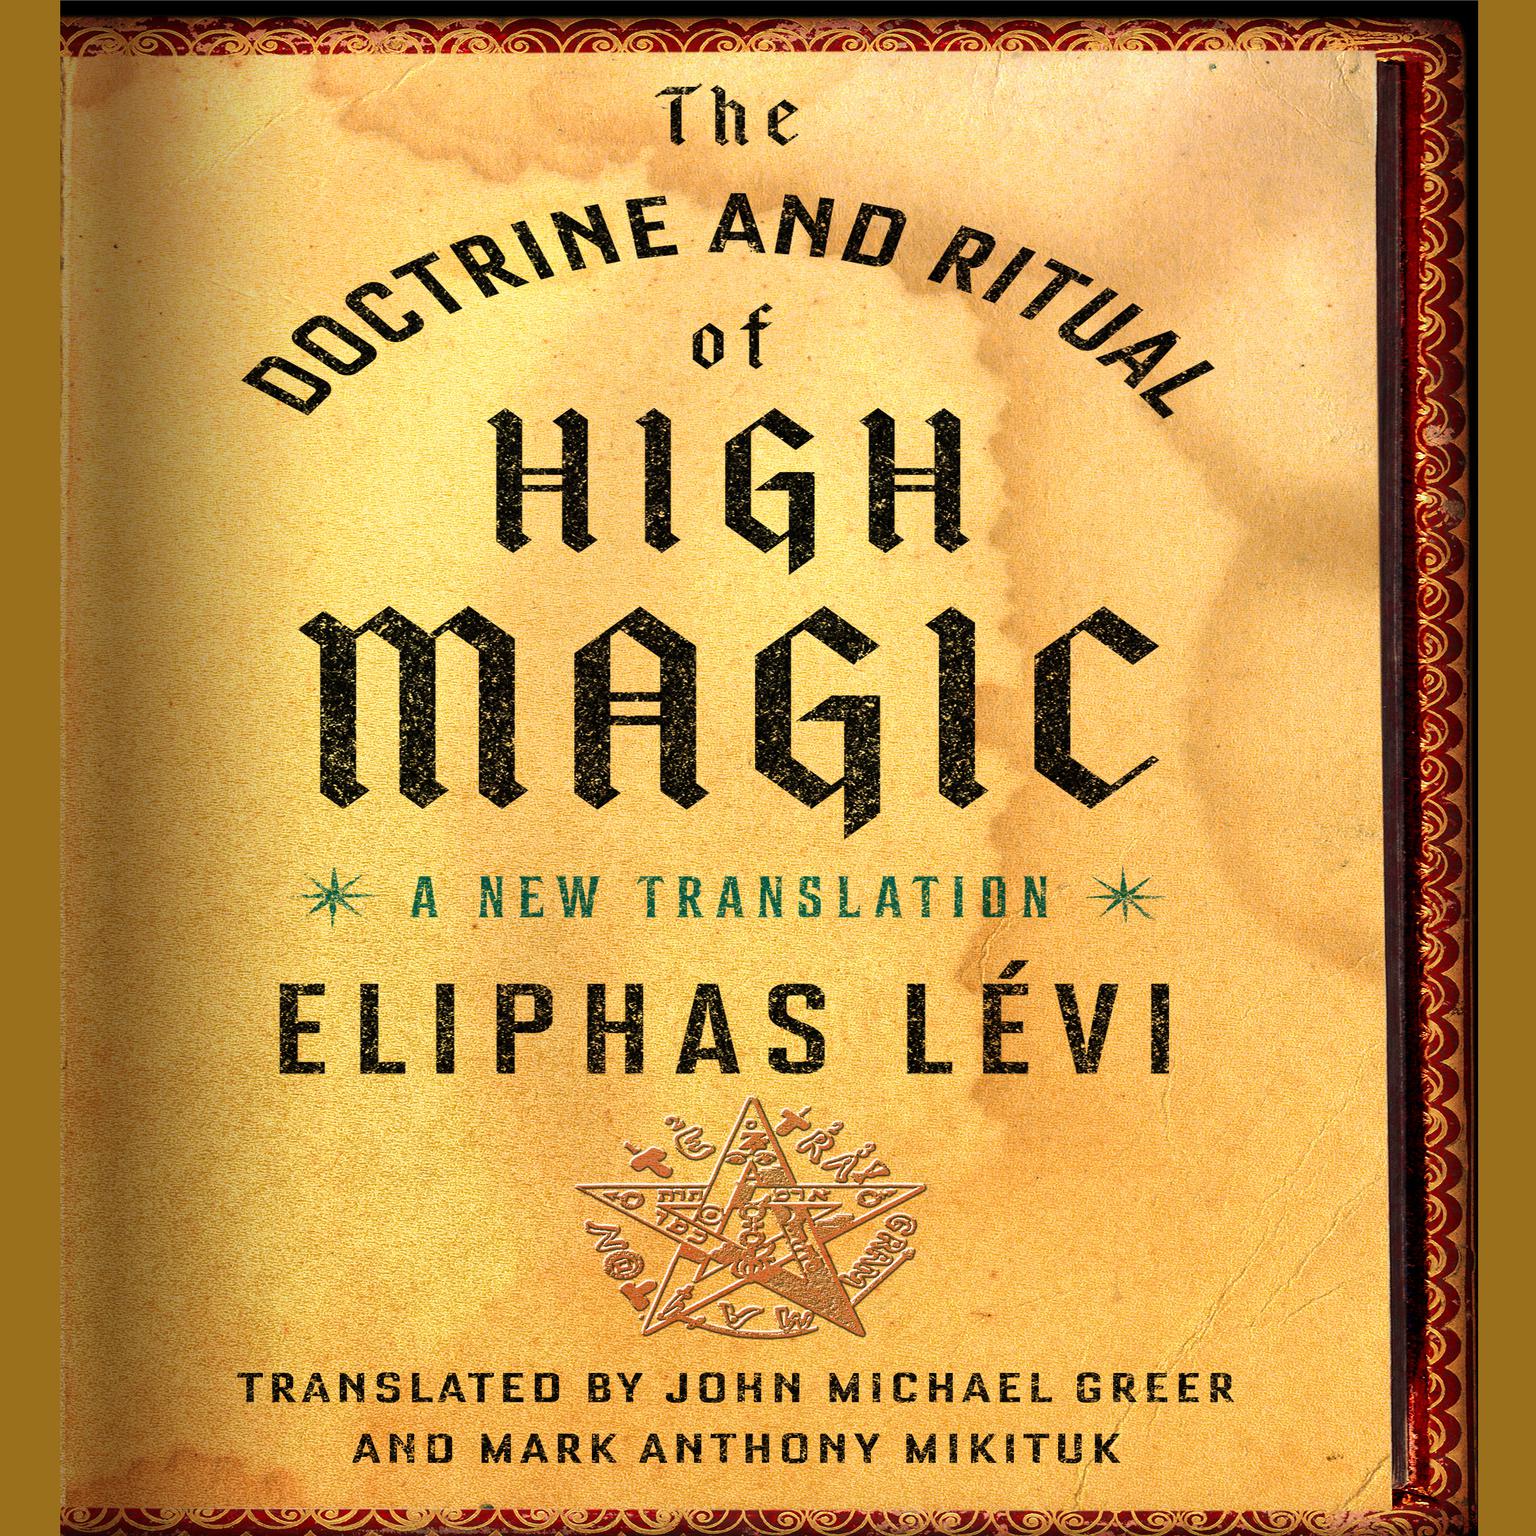 The Doctrine and Ritual High Magic: A New Translation Audiobook, by Eliphas Lévi